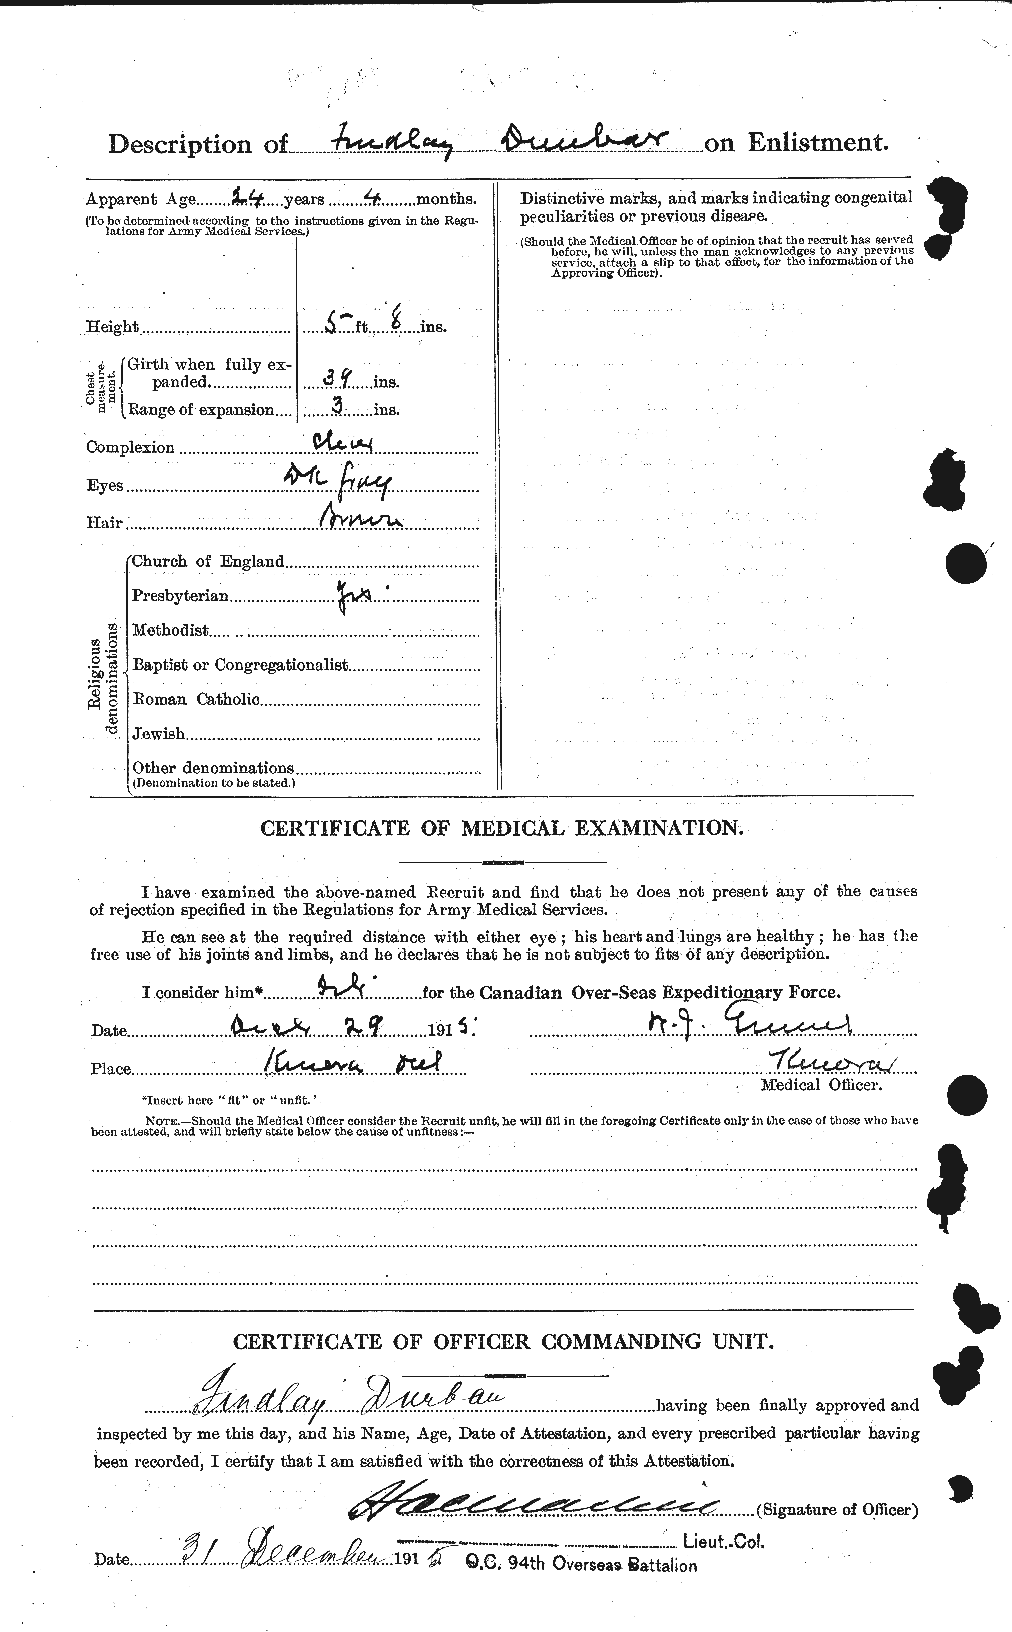 Personnel Records of the First World War - CEF 301487b